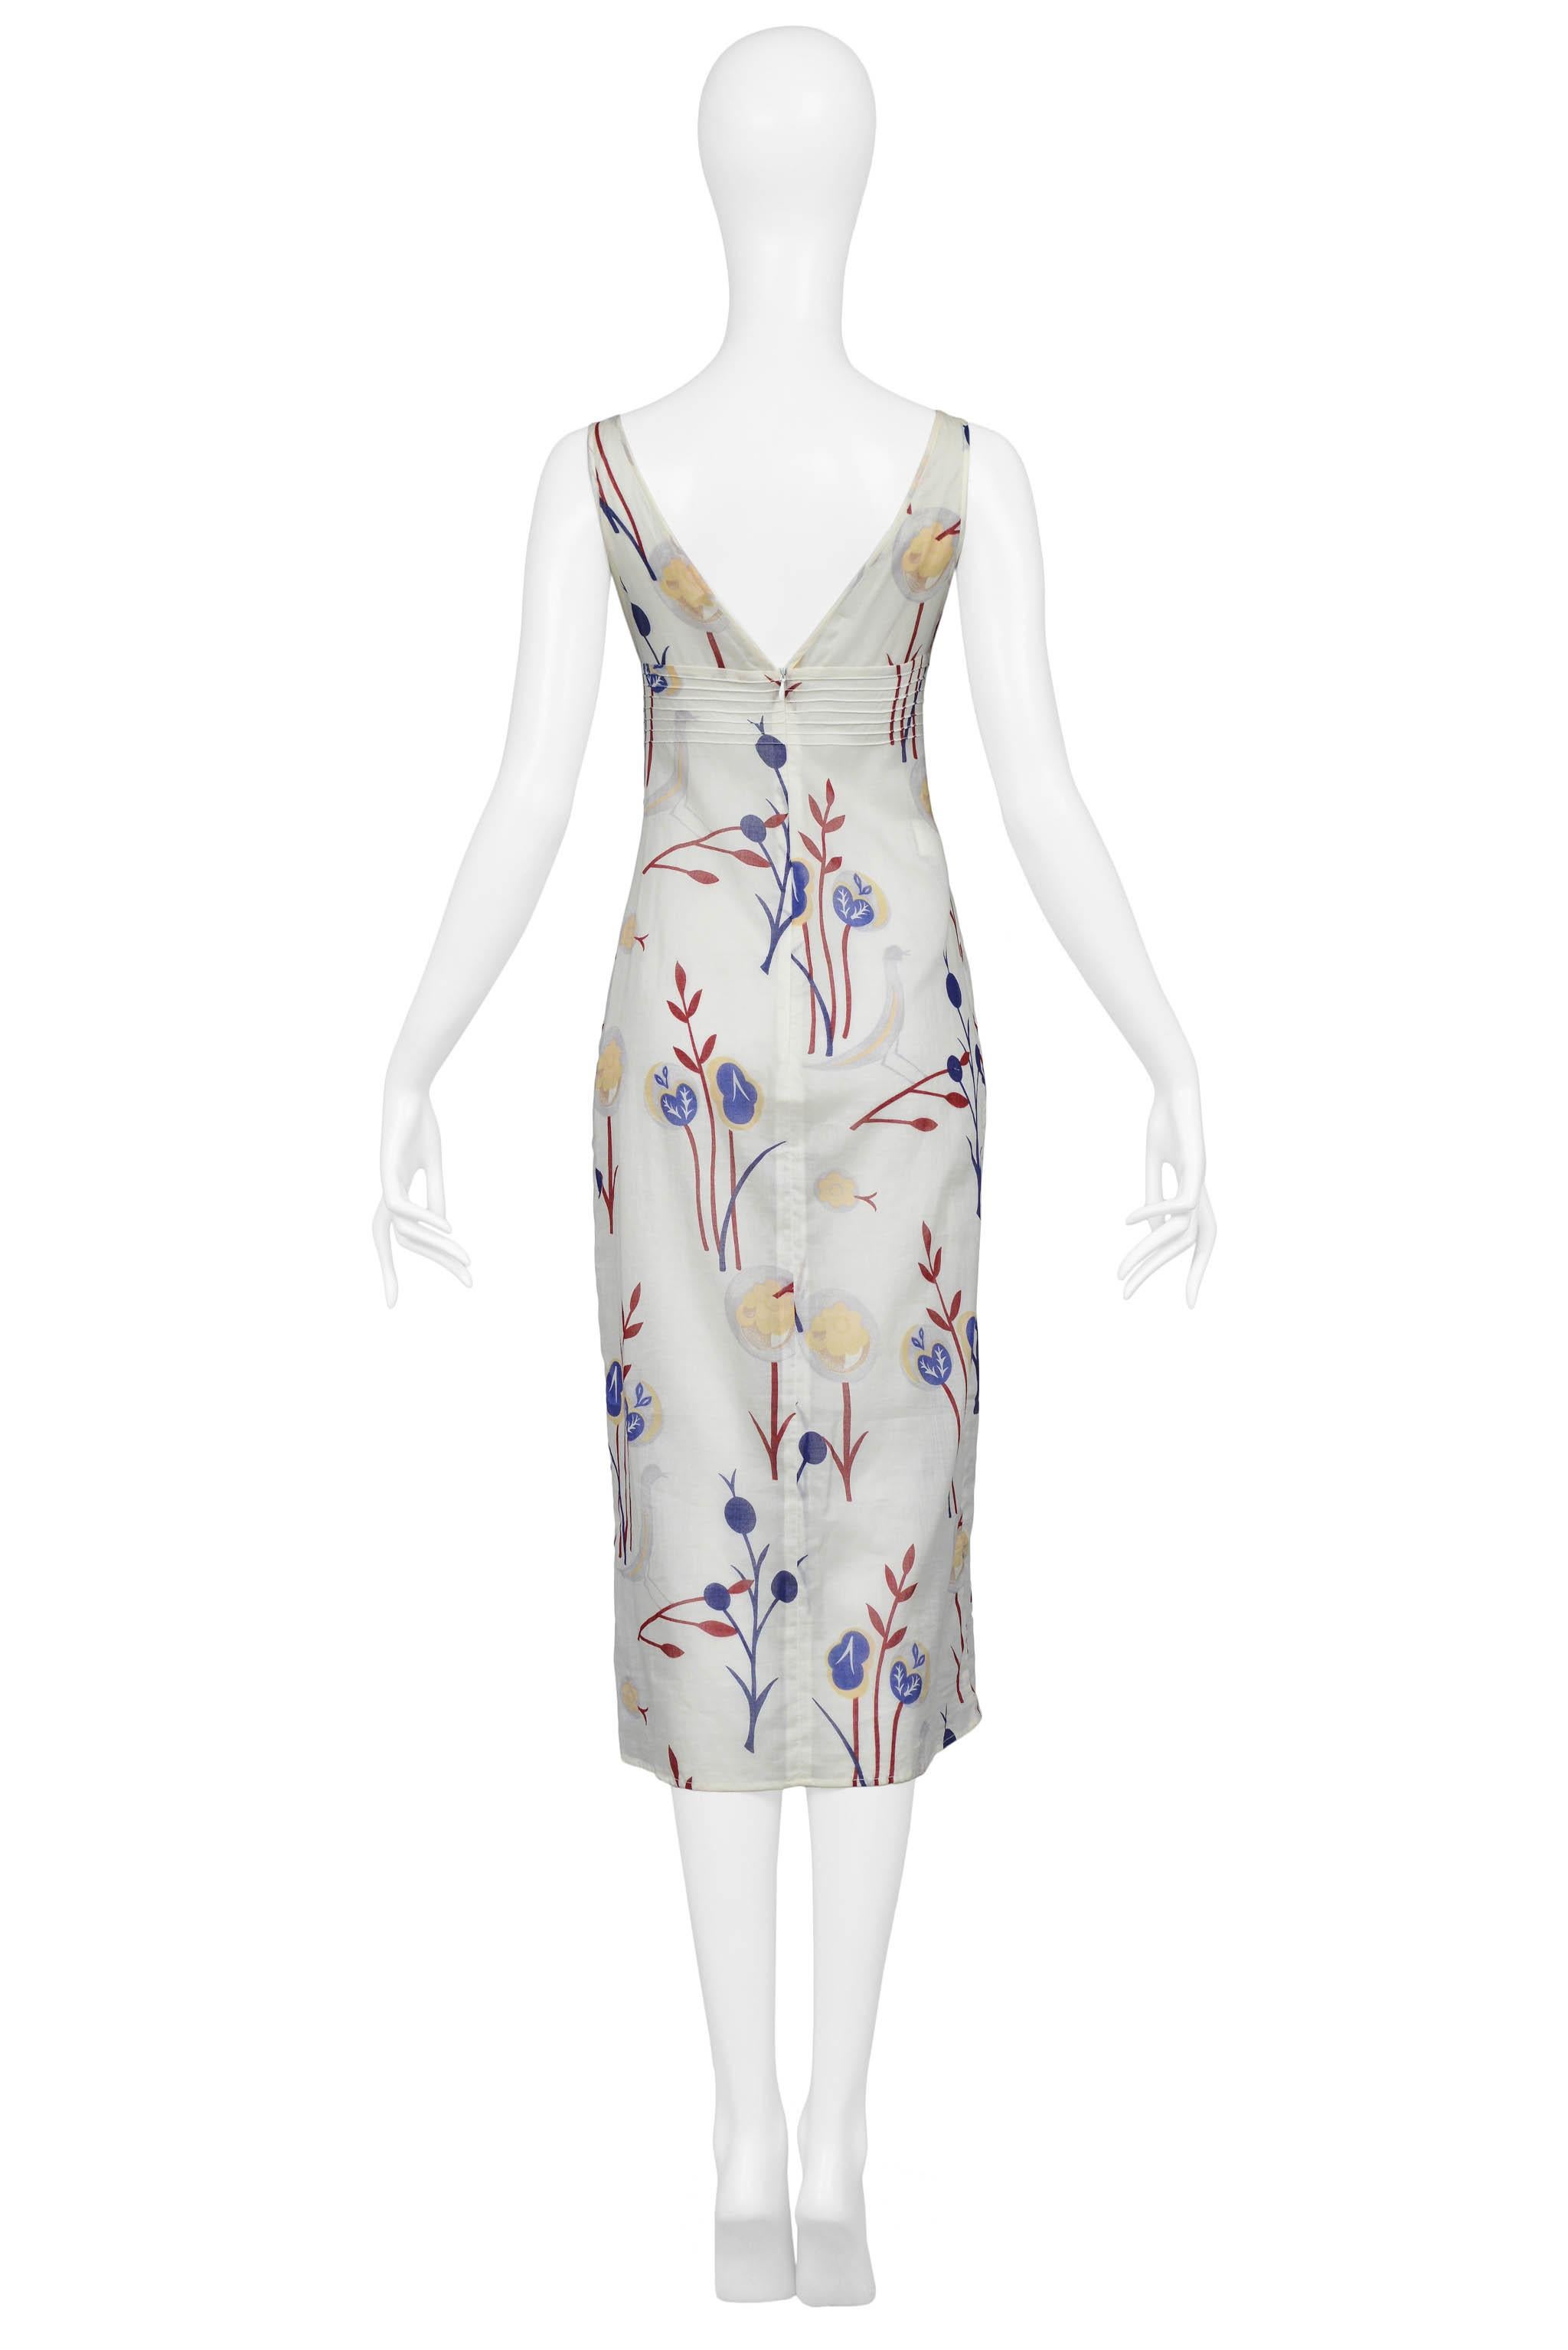 Miu Miu White Floral Printed Slip Dress SS 1997 In Excellent Condition In Los Angeles, CA